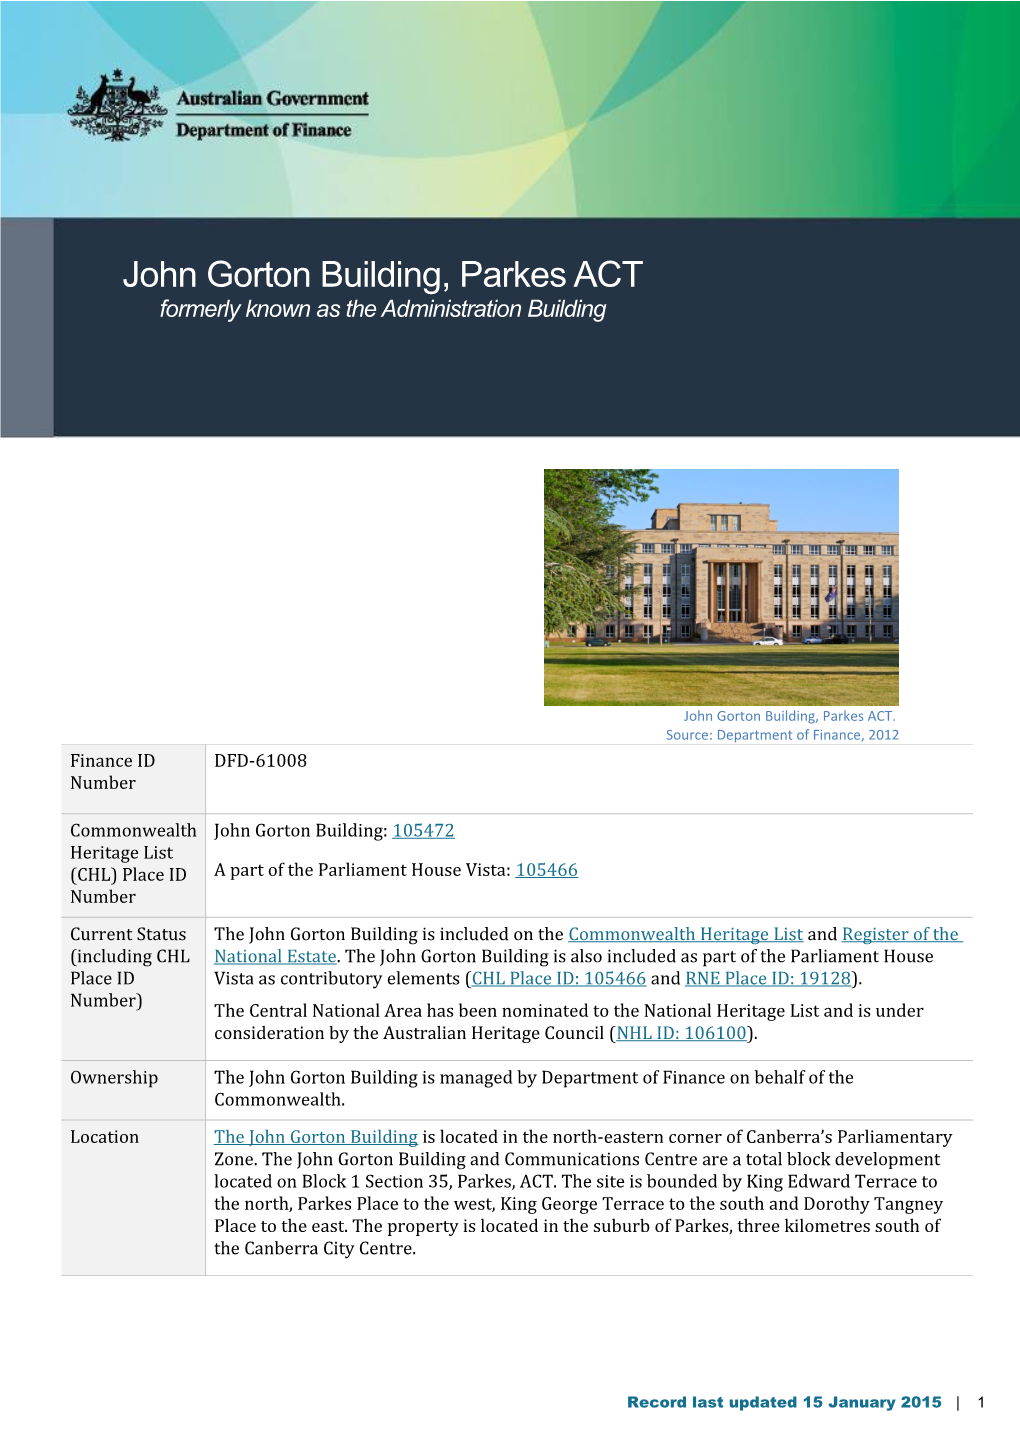 John Gorton Building, Parkes Actformerly Known As the Administration Building